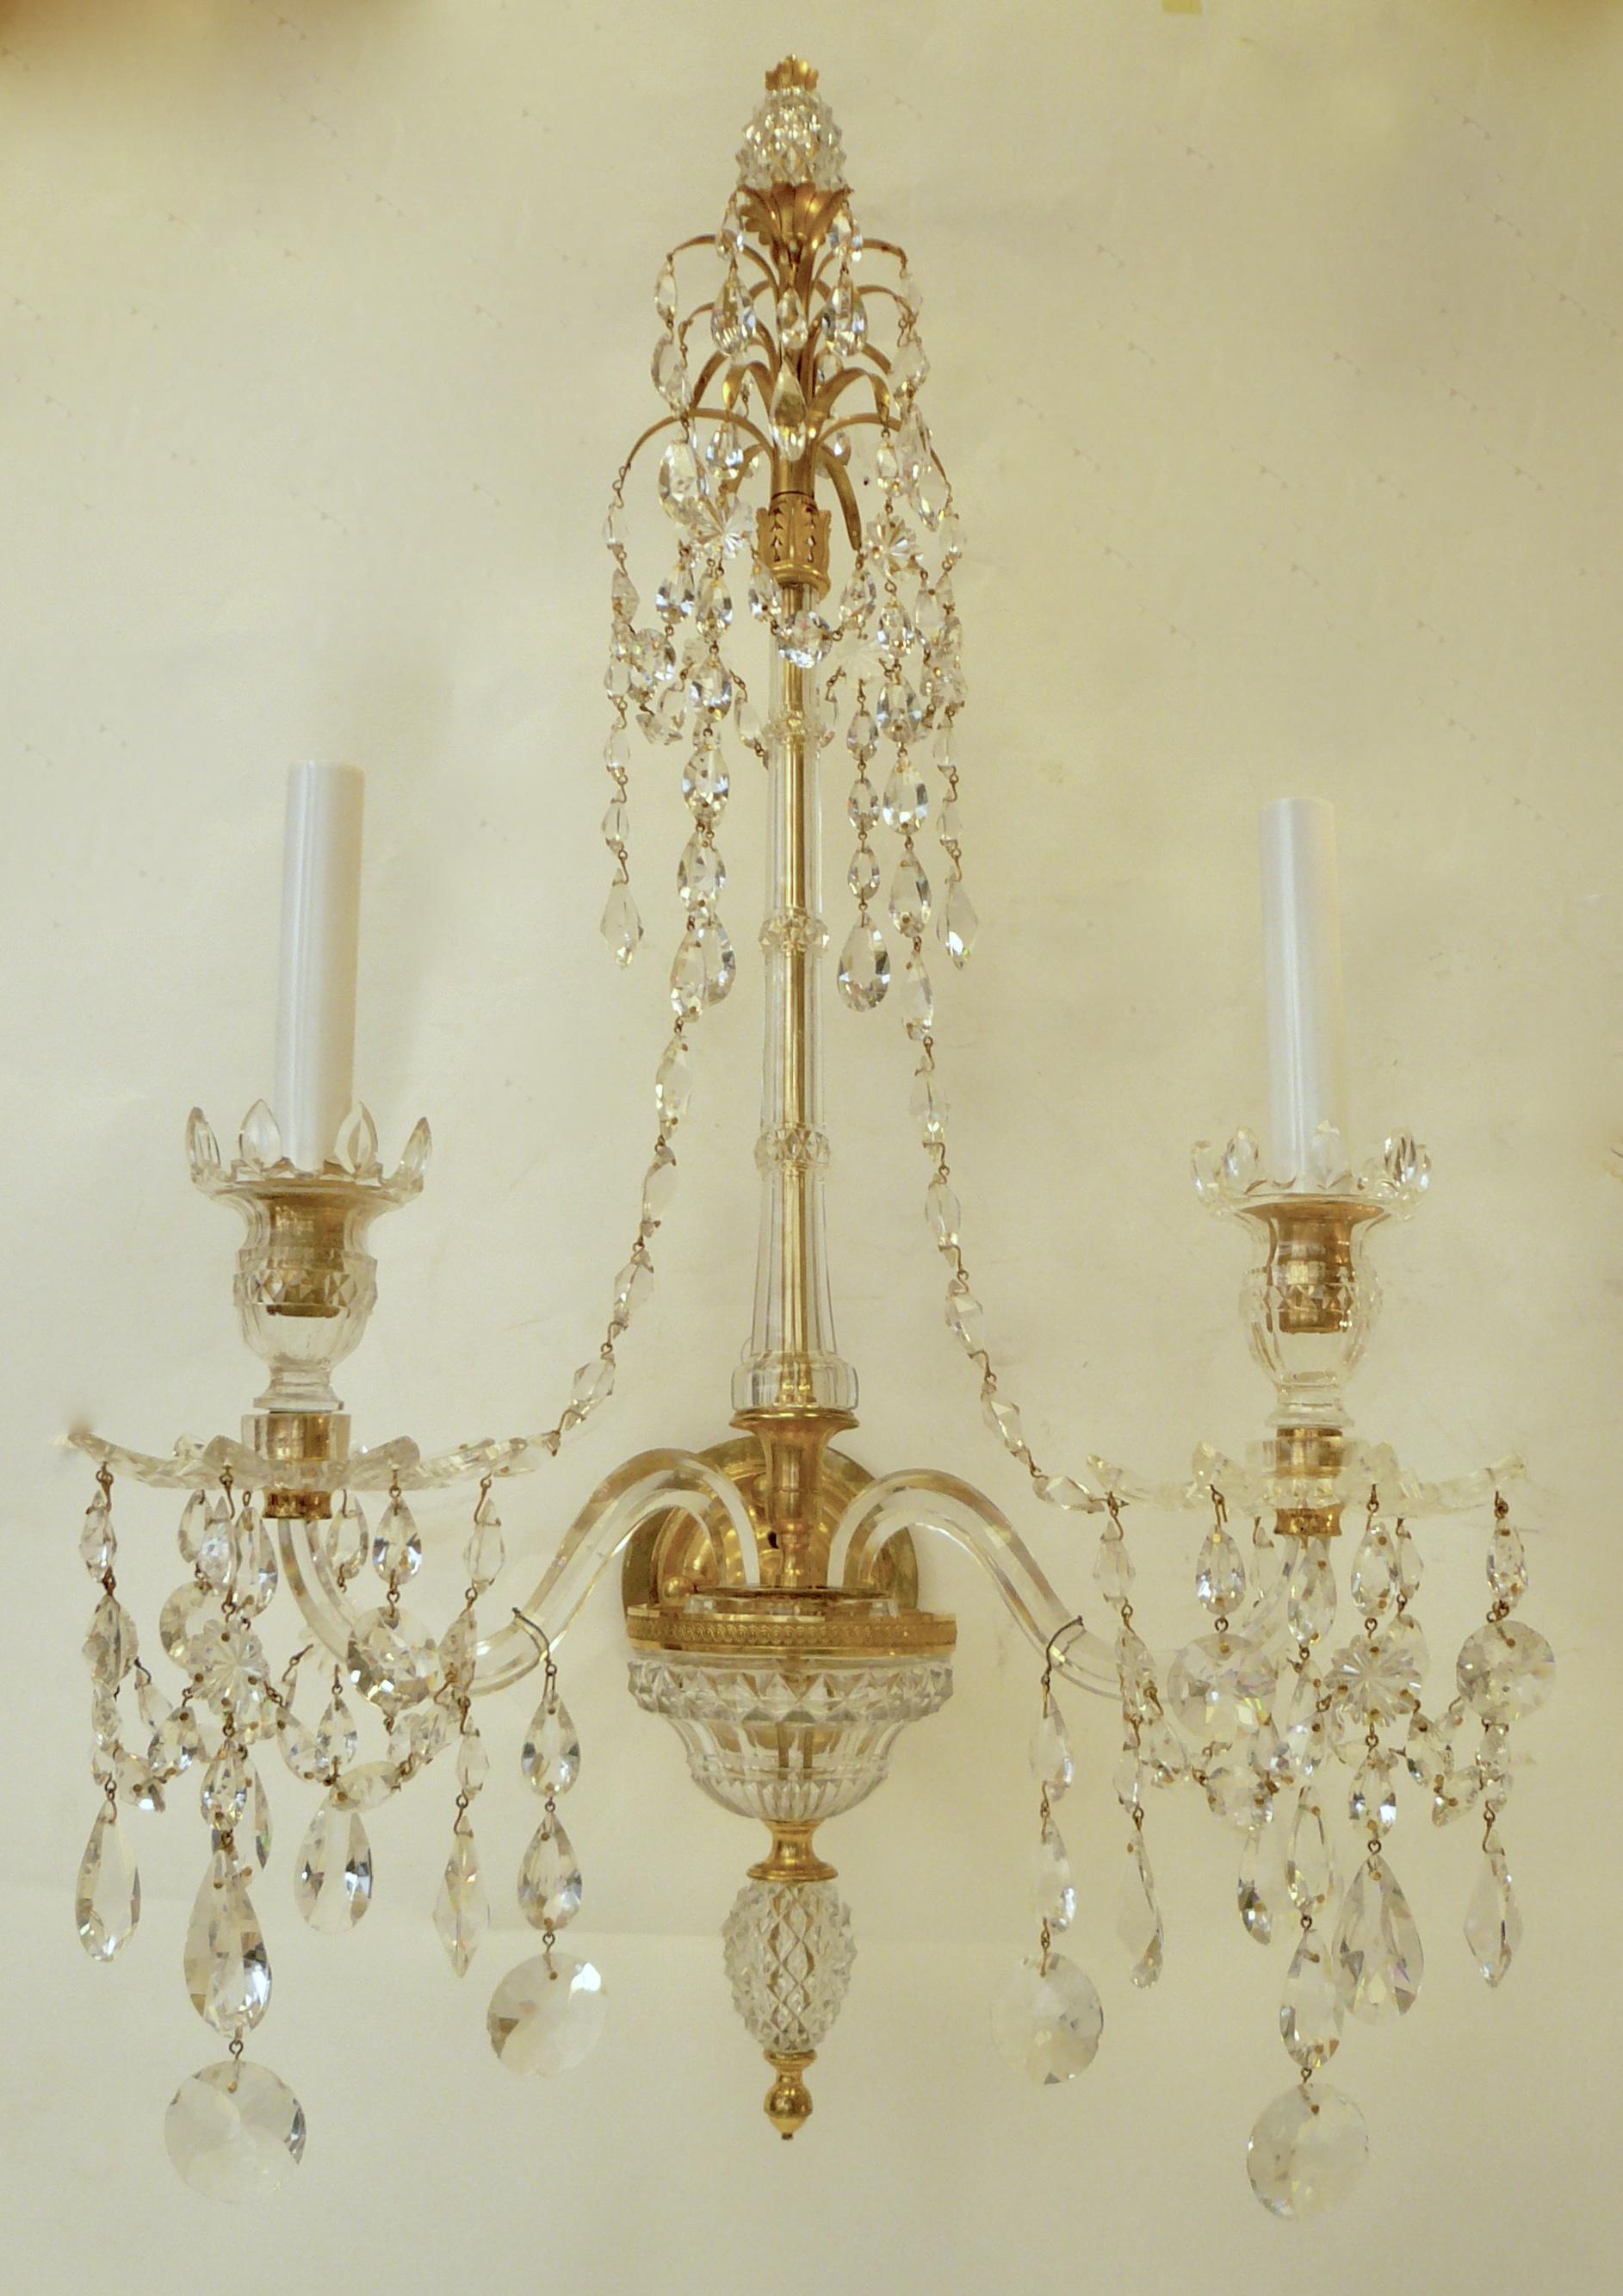 Exquisite Pair of Georgian Sconces in the Adam Style, Attributed to Wm. Parker For Sale 7